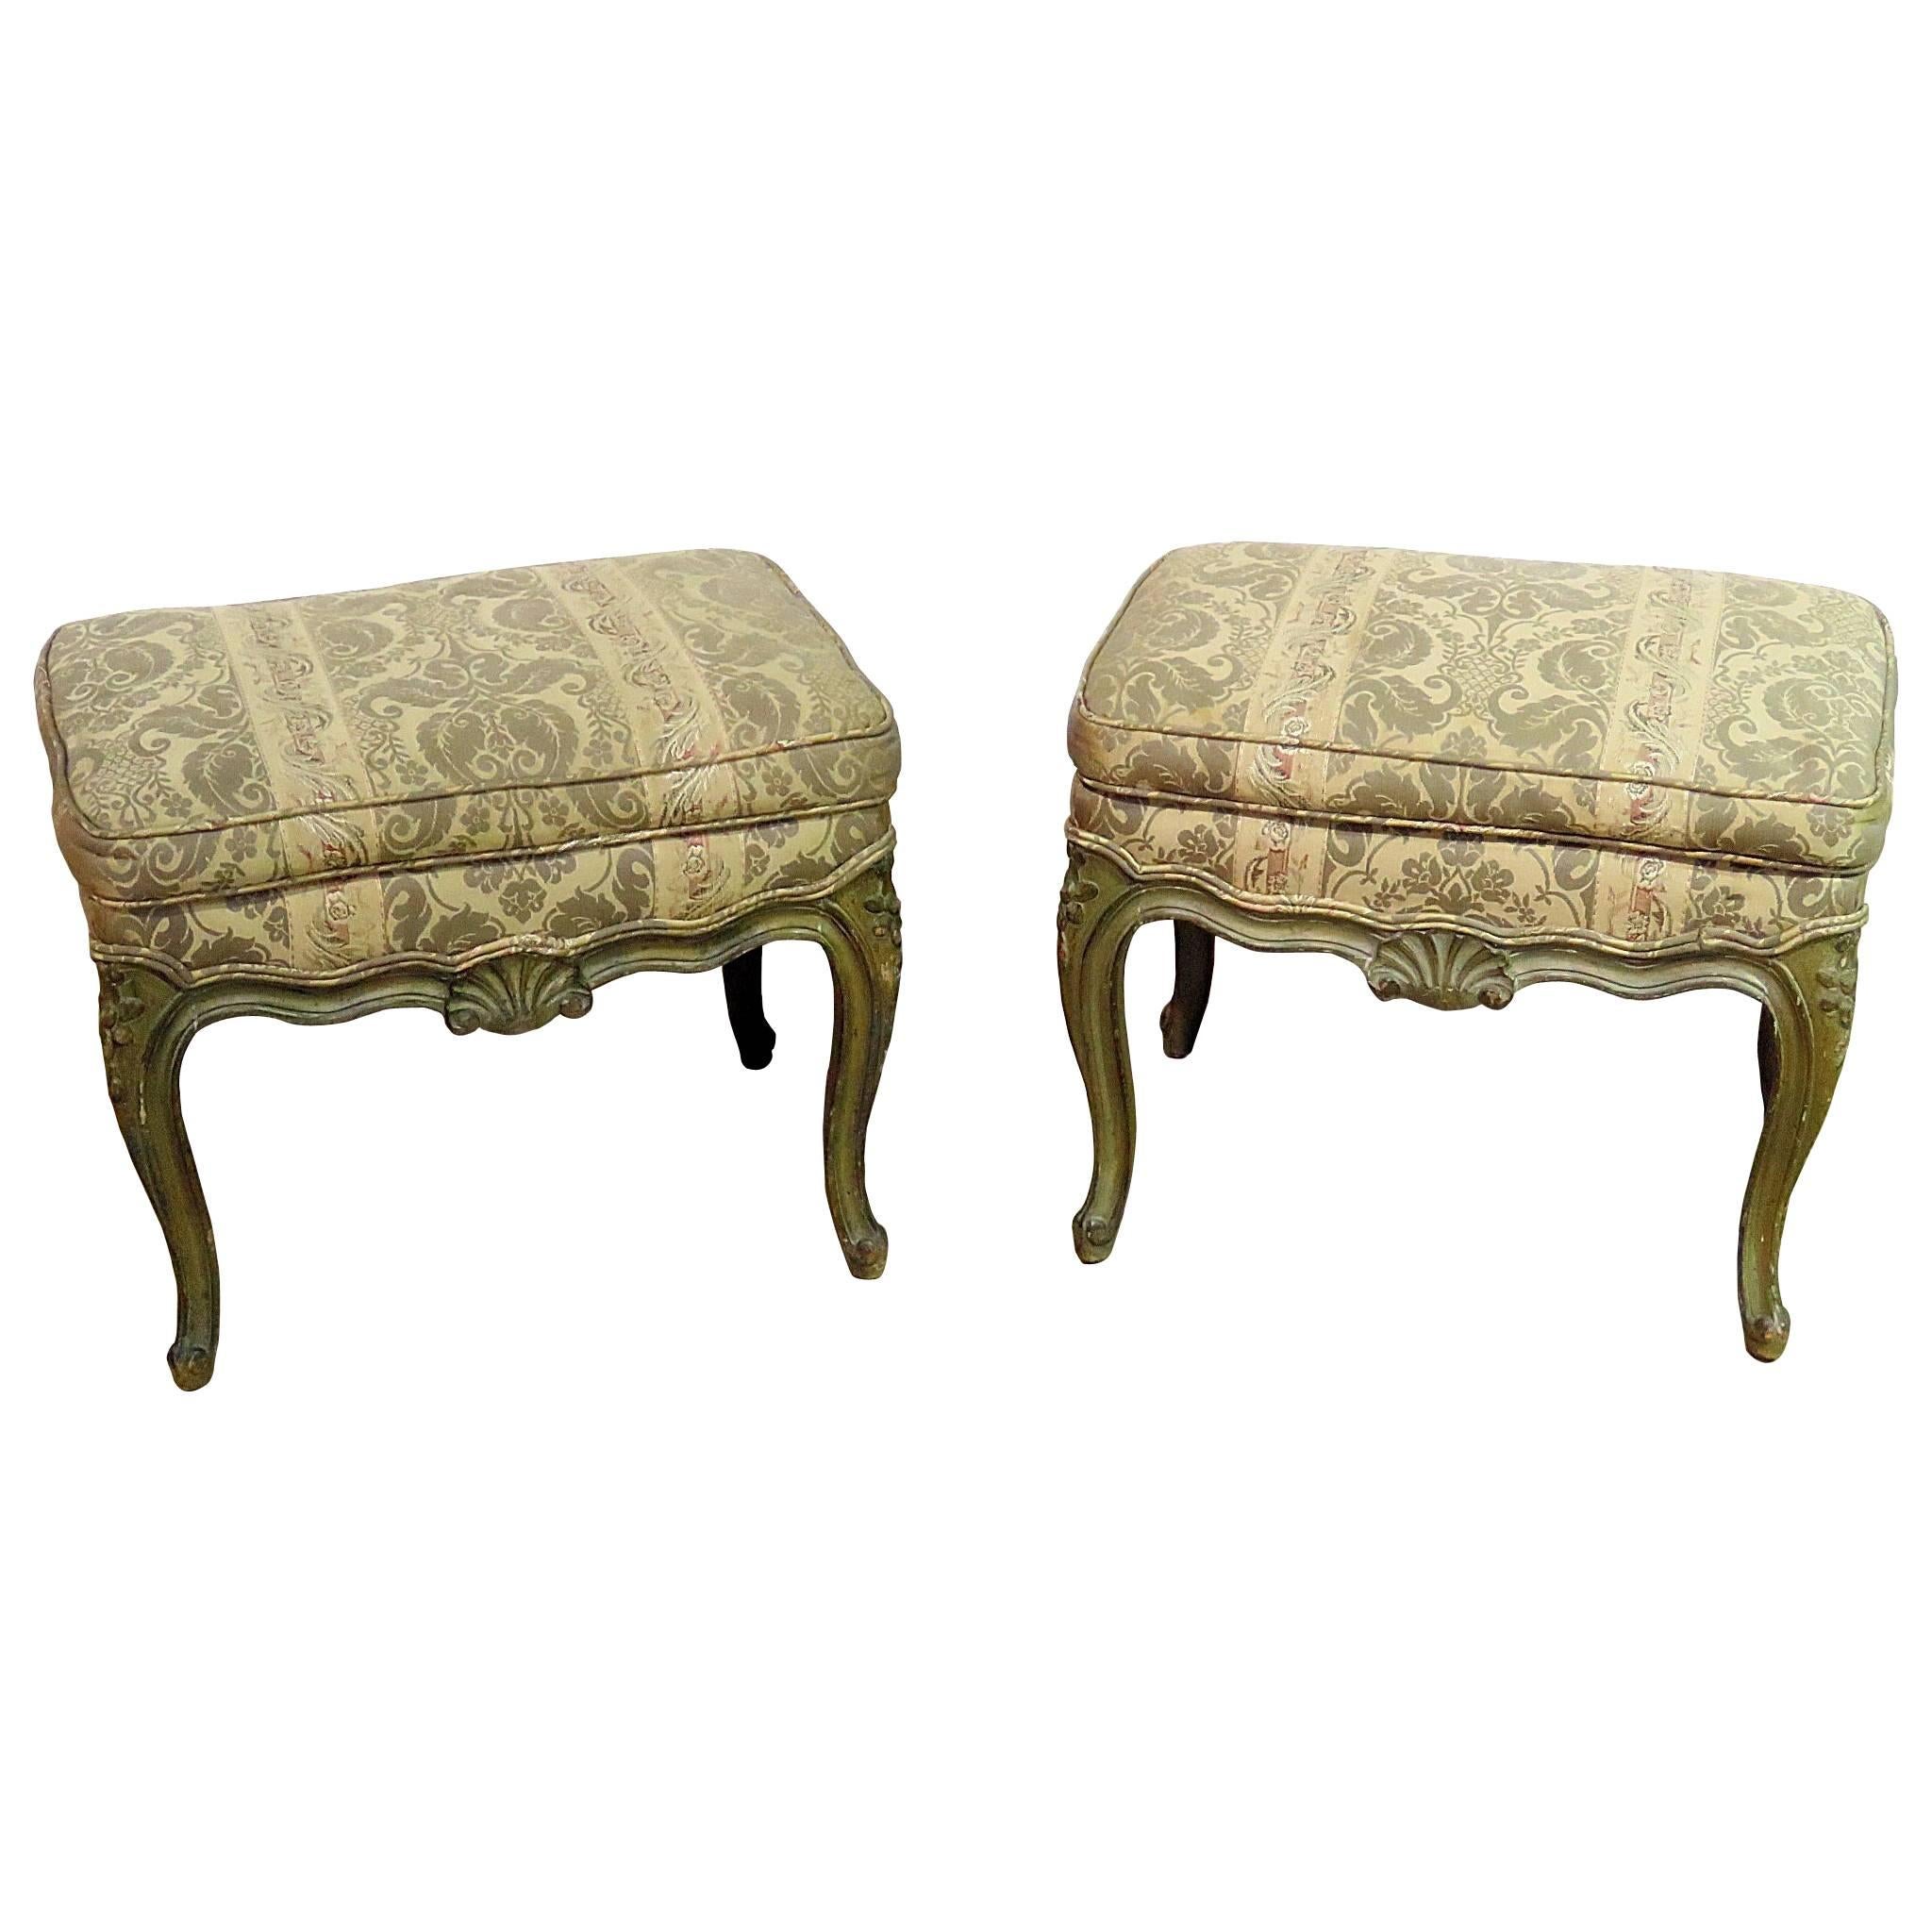 Pair of French Painted Louis XV Style Benches or Stools